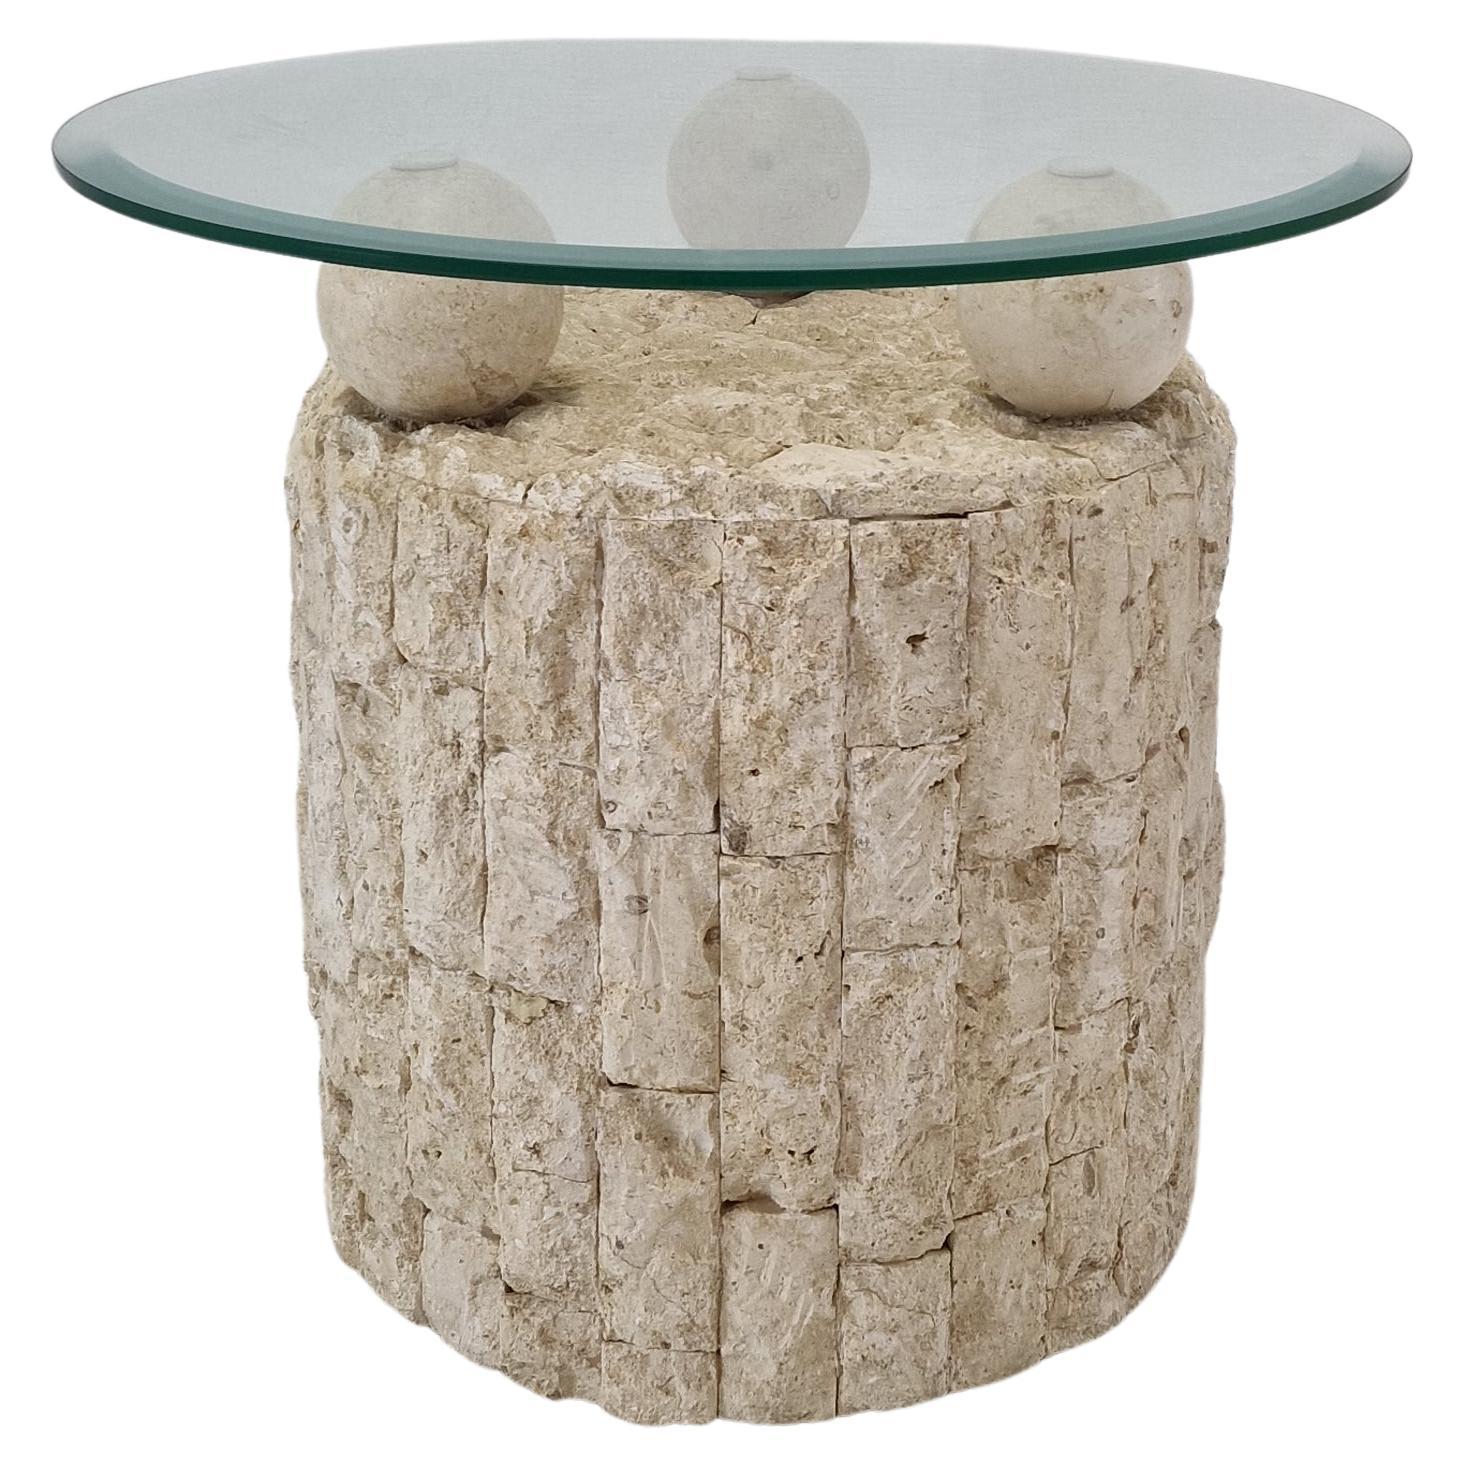 Magnussen Ponte Mactan Stone Coffee or Fossil Stone Table, 1980s